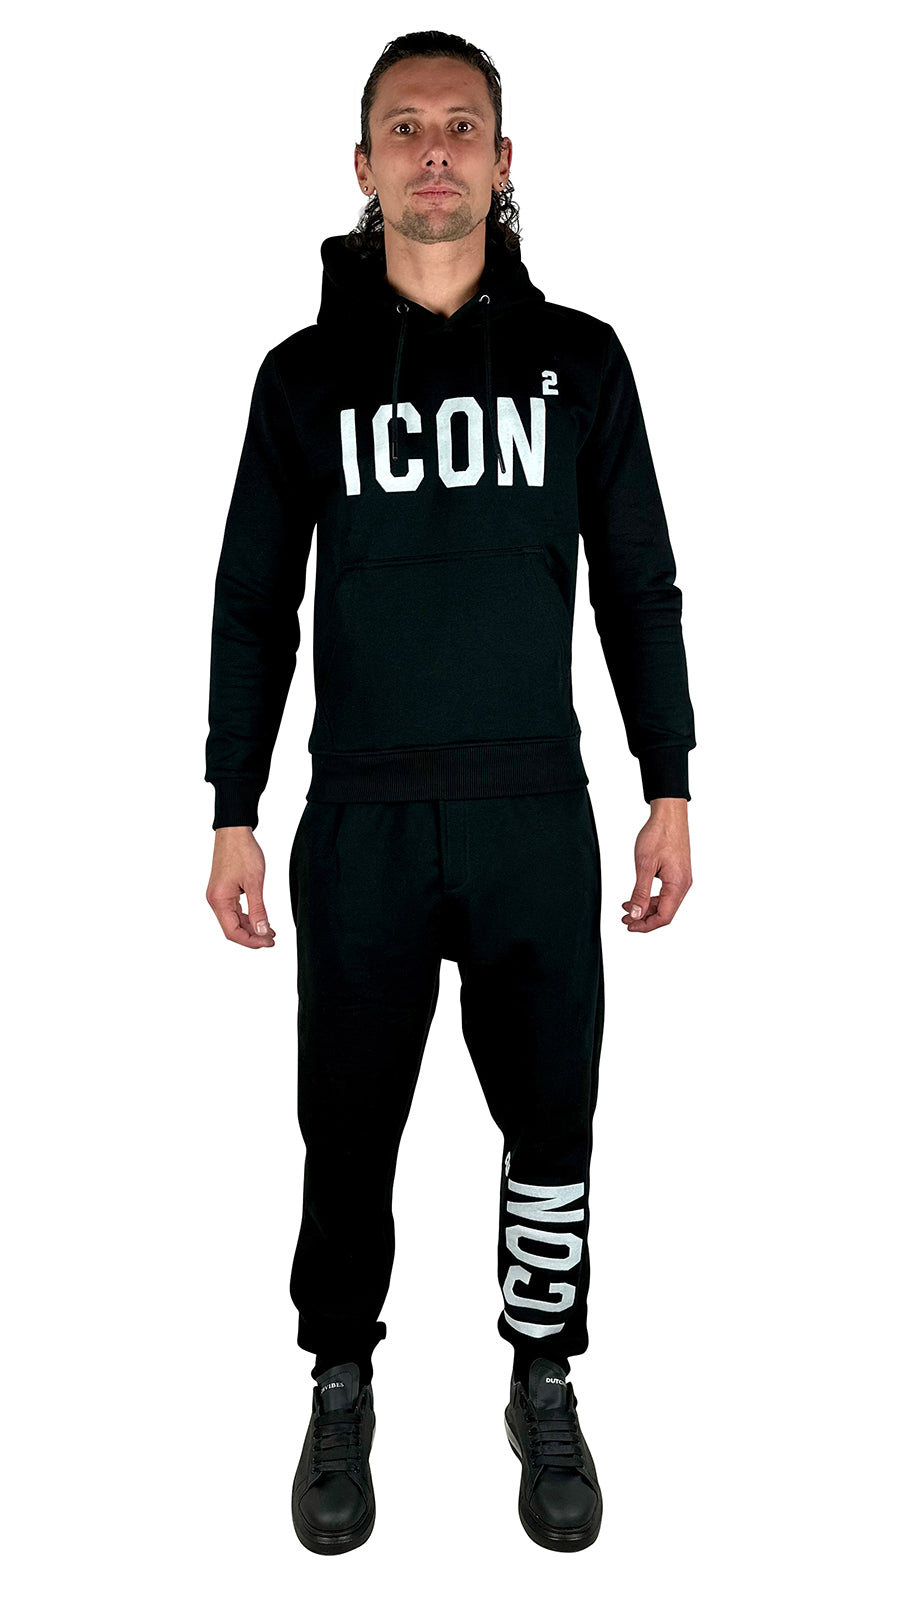 THE ICON TRACK SUIT - BLACK